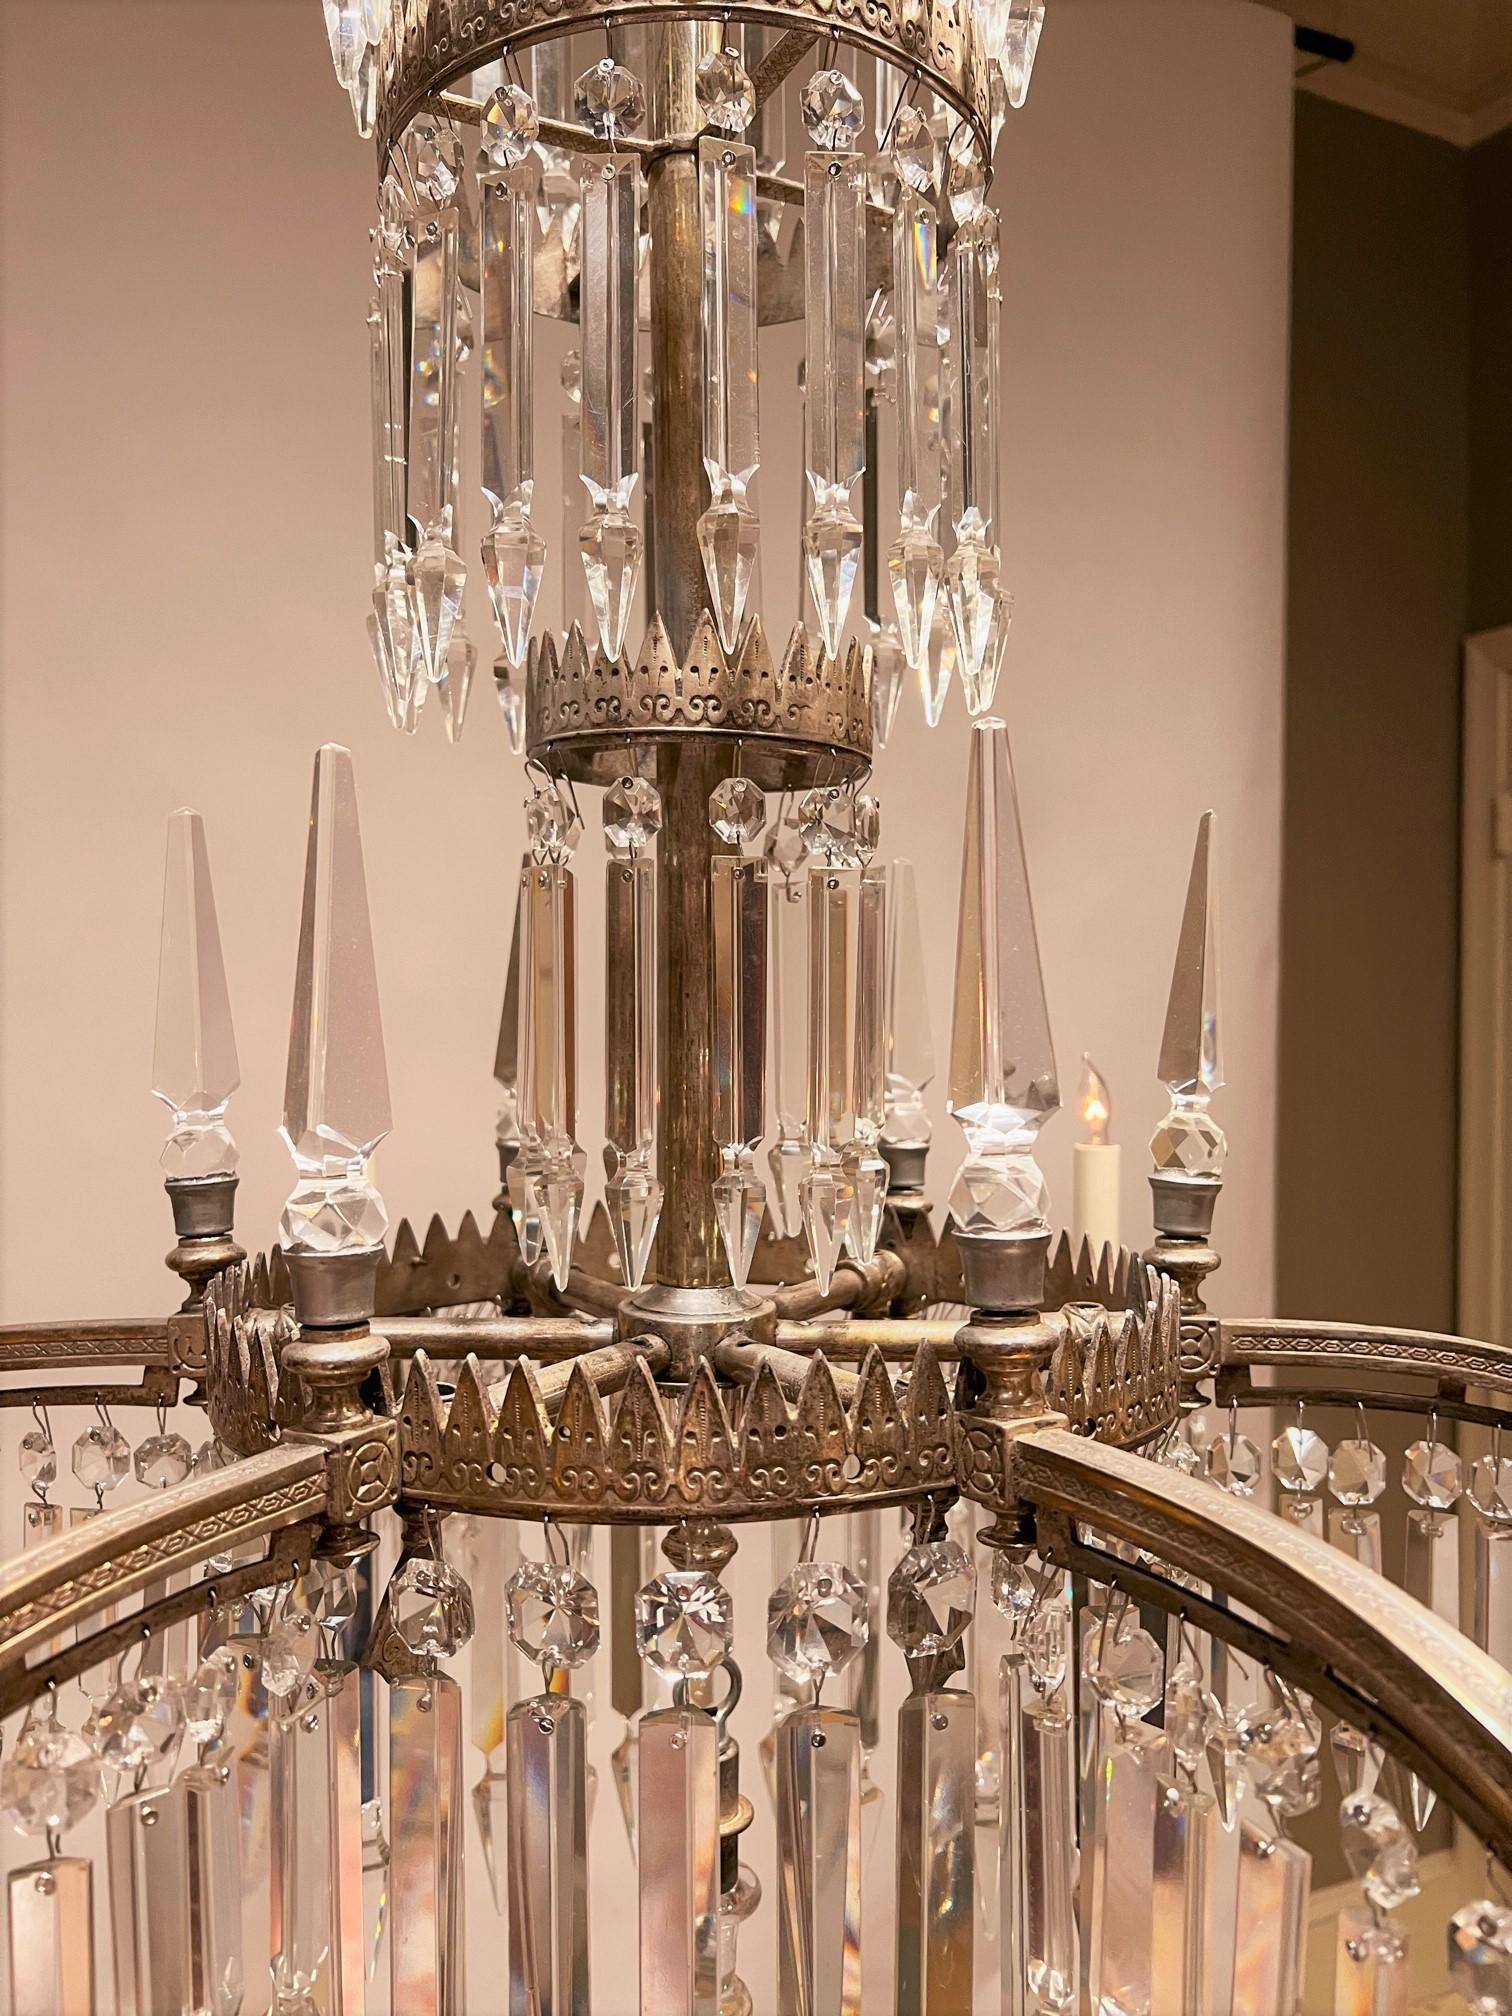 19th Century 6-Light Silvered Bronze & Crystal Electrified Gasolier, America, Circa:1850 For Sale